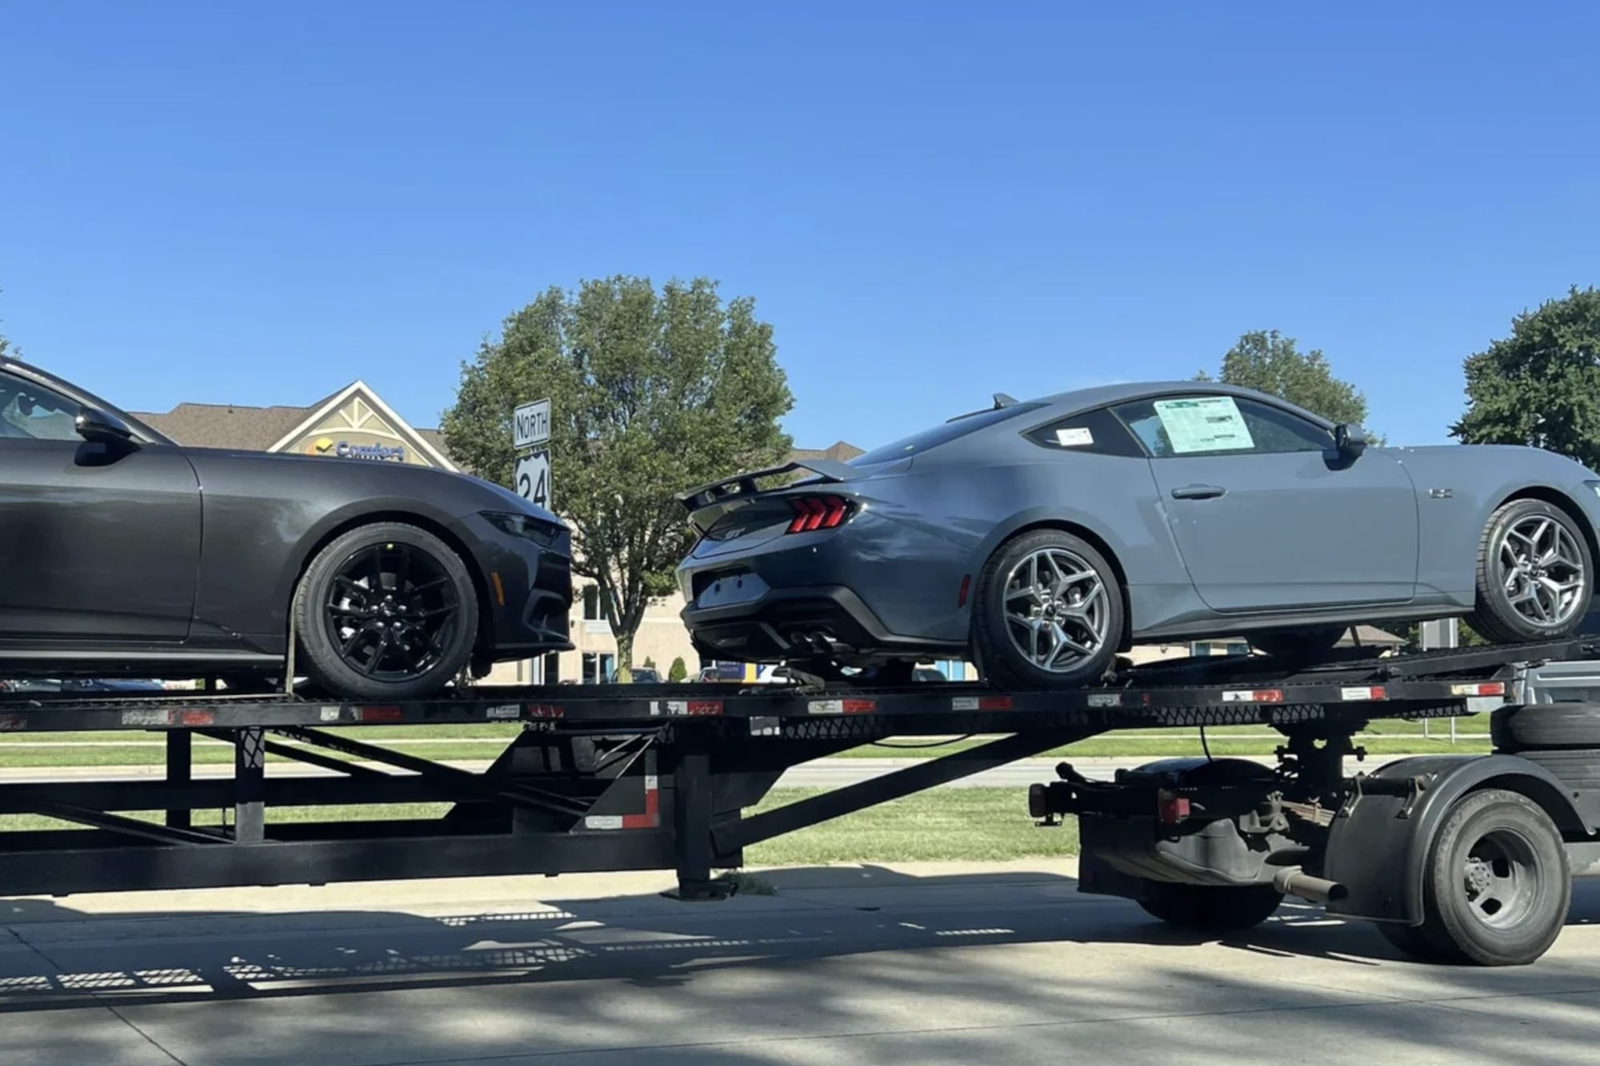 video, s650 ford mustang deliveries may already be underway